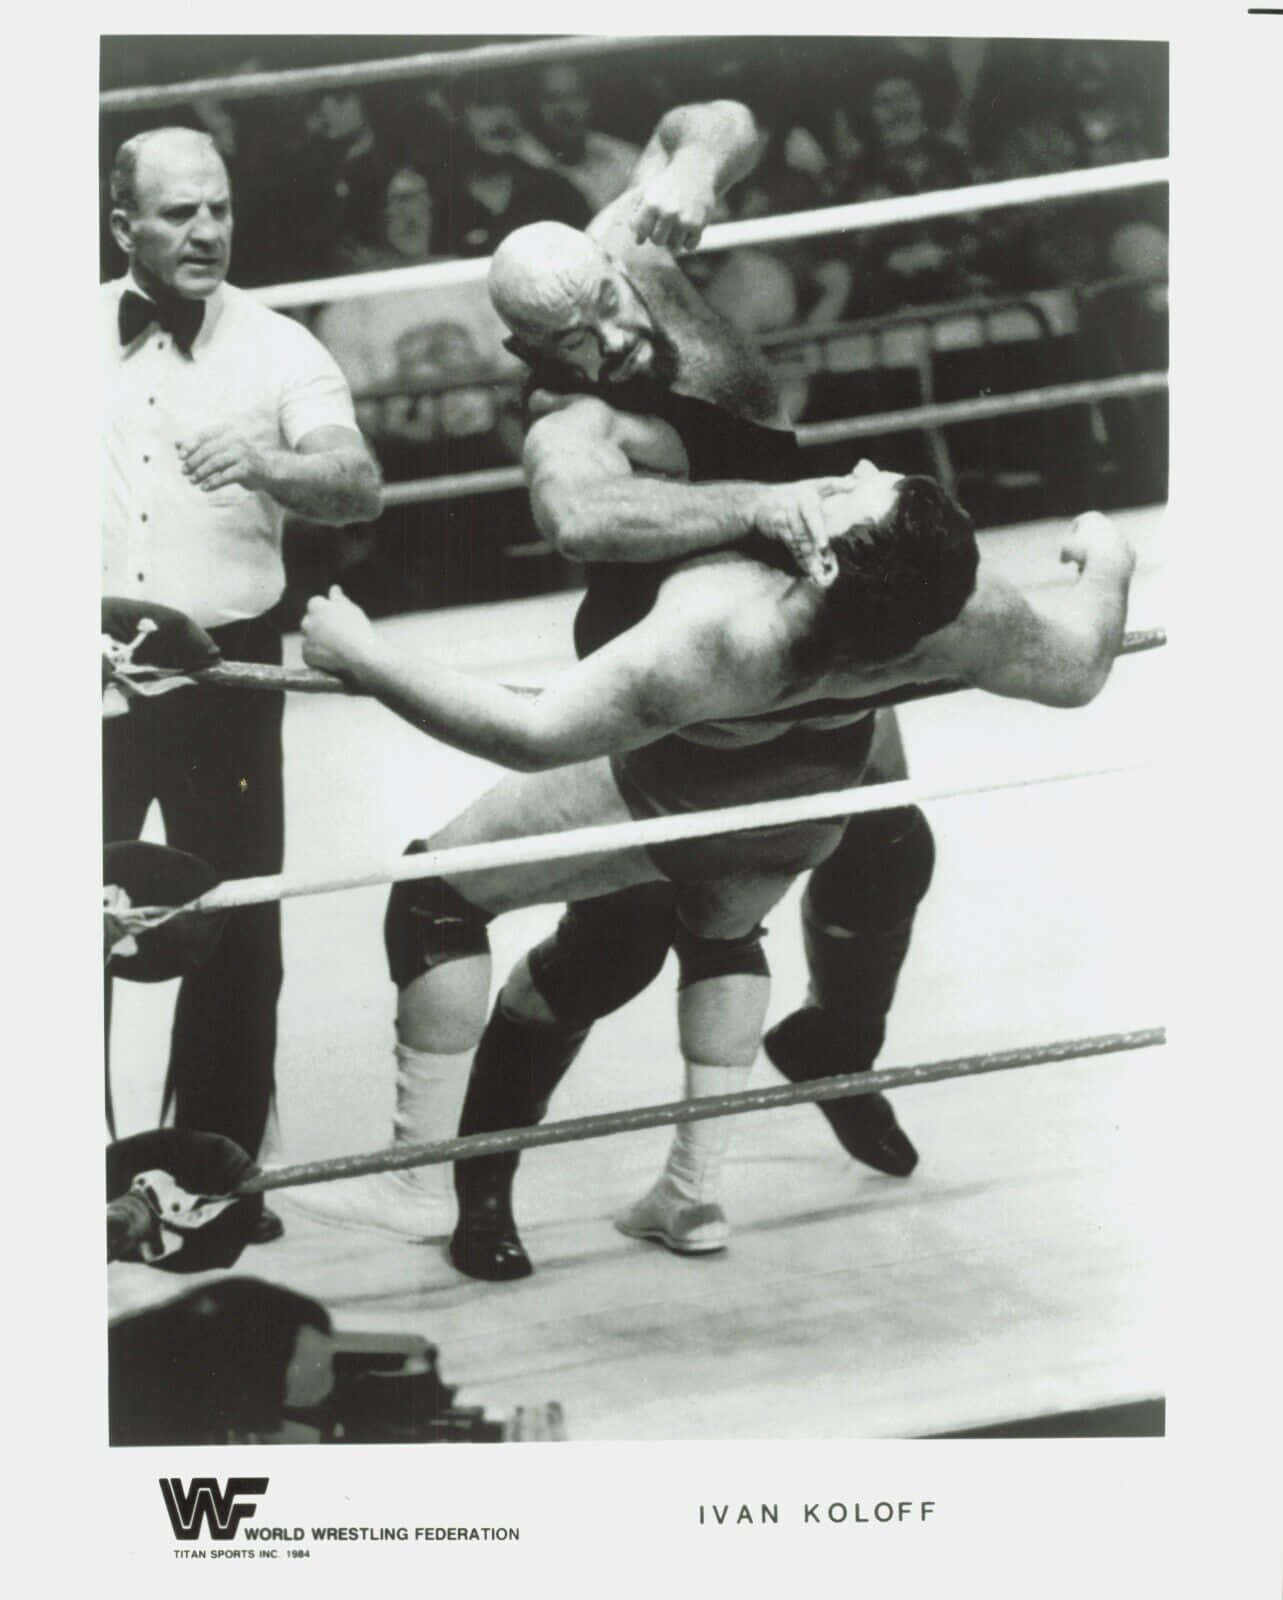 Intense moment in the ring with Canadian Wrestler Ivan Koloff Wallpaper